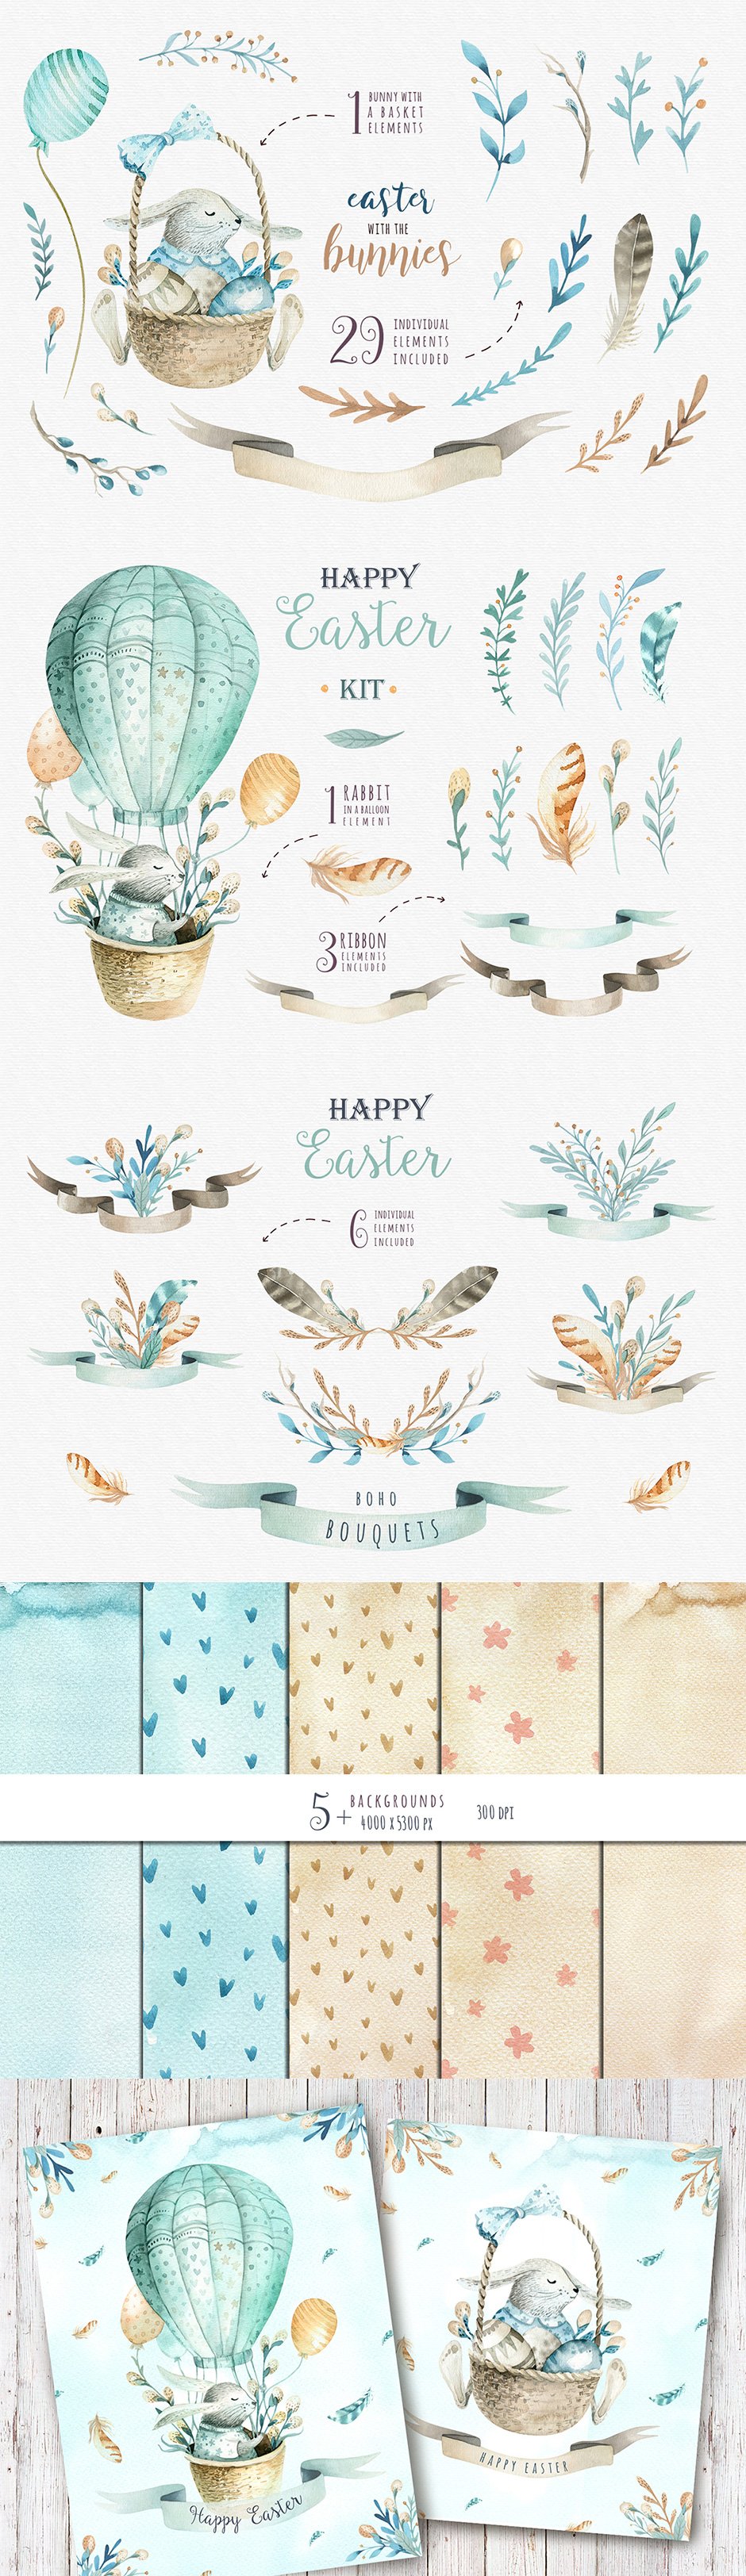 Happy Easter with Bunnies 